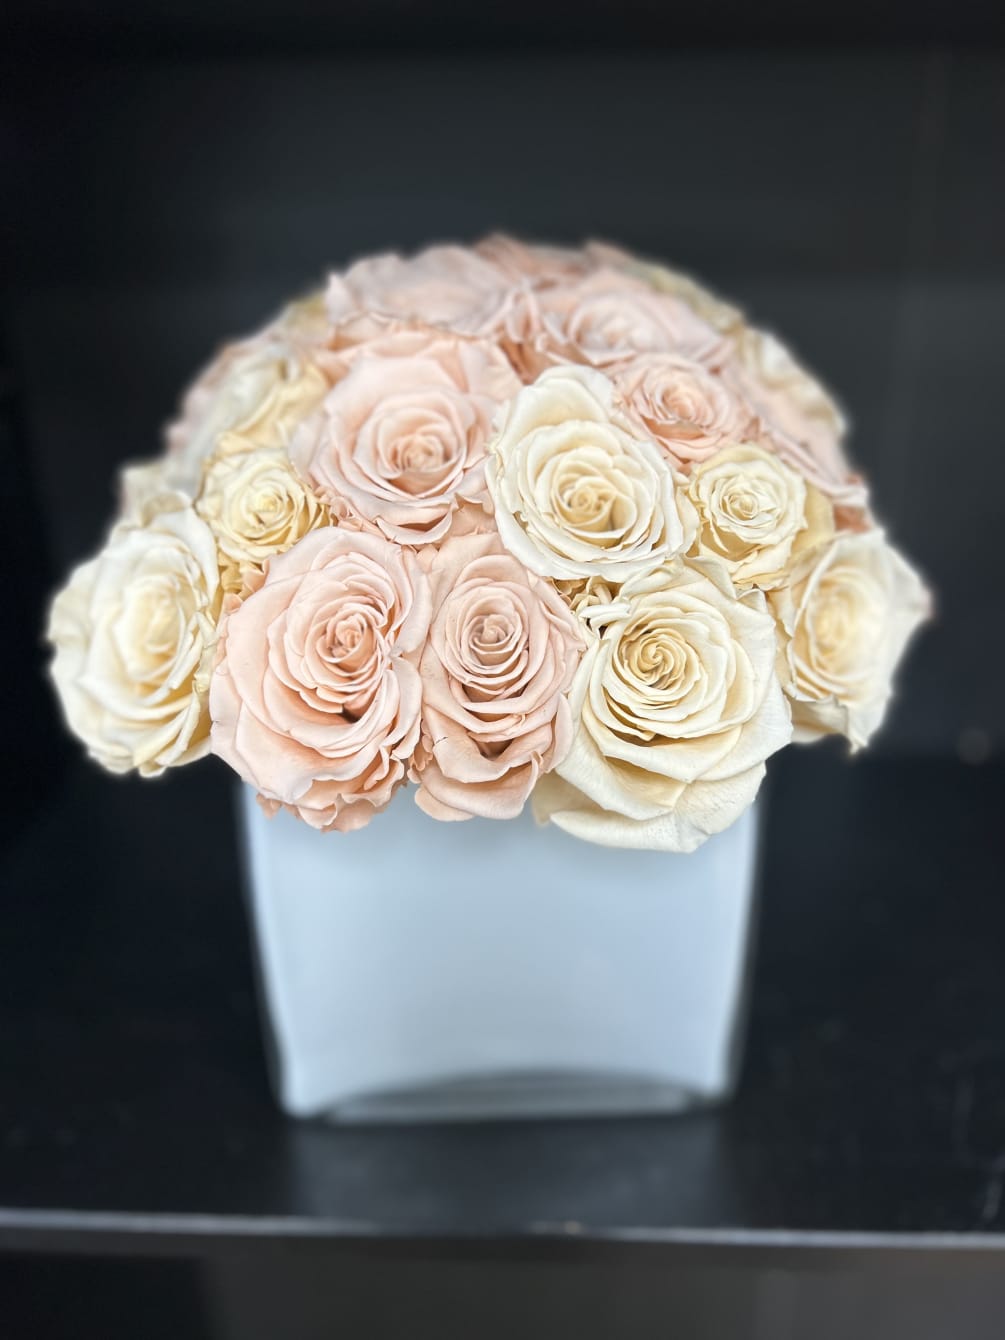 A beautiful assortment of long lasting preserved roses. Measures 10.5&rdquo; by 10.5&rdquo;.